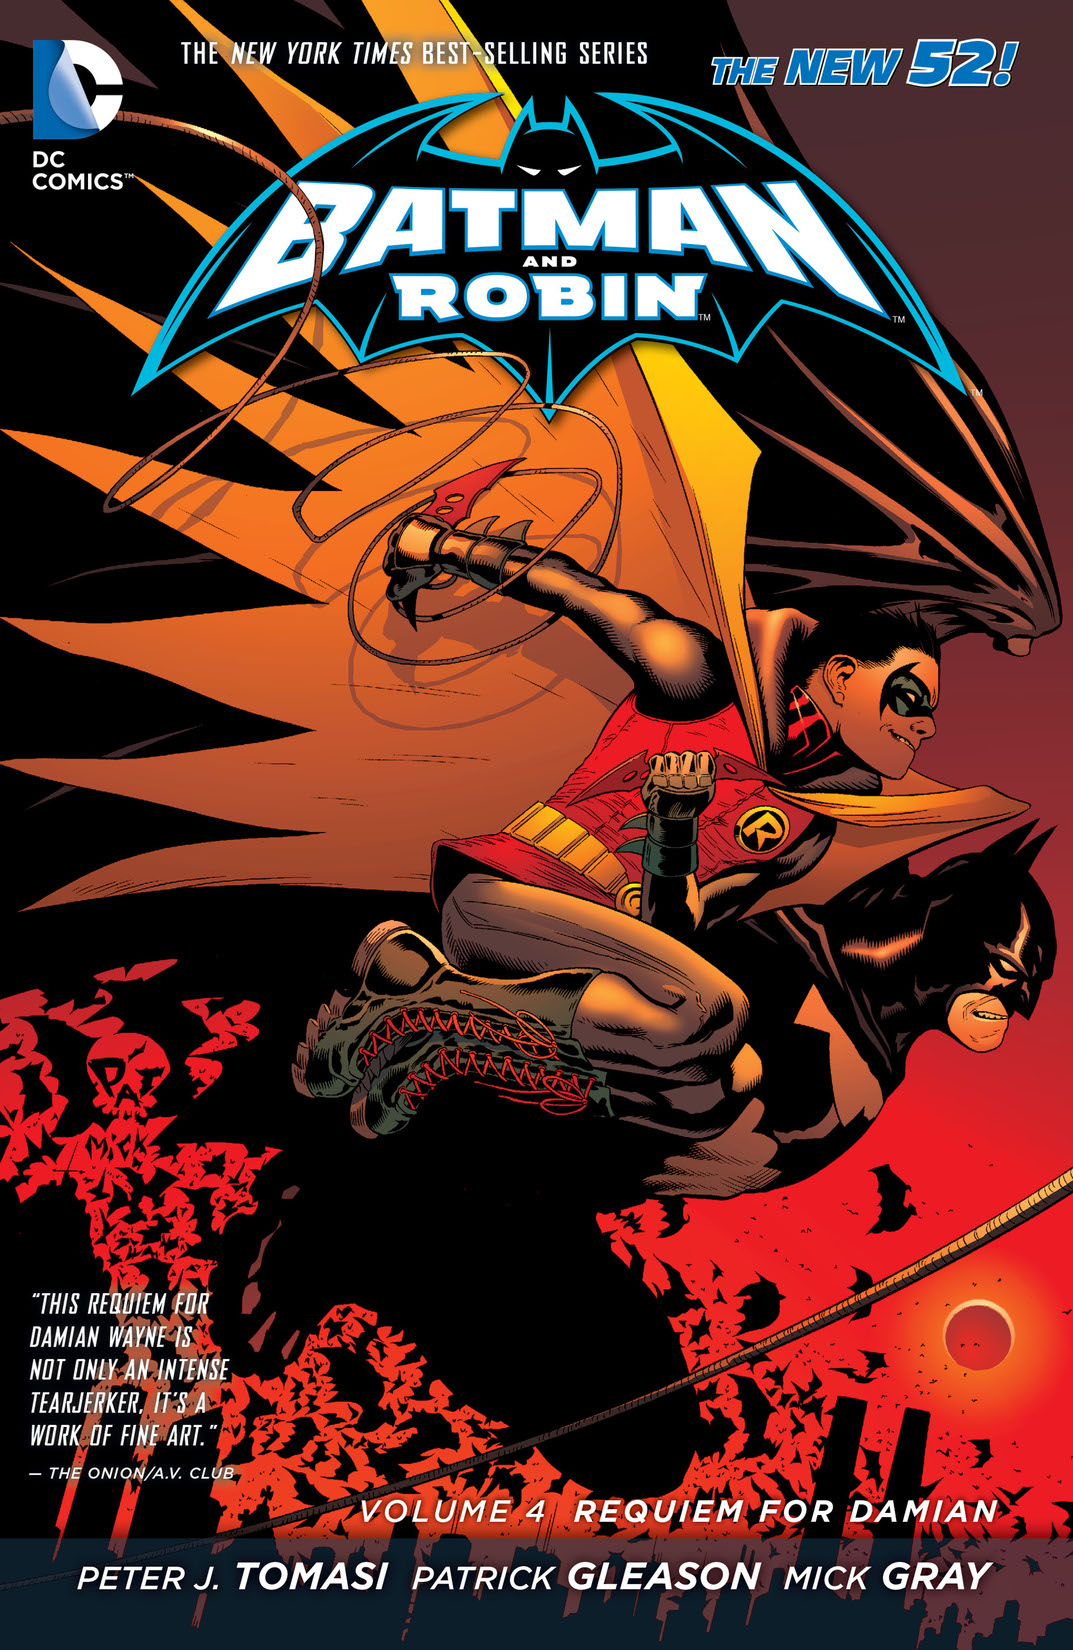 Batman and Robin Vol. 4: Requiem for Damian preview images